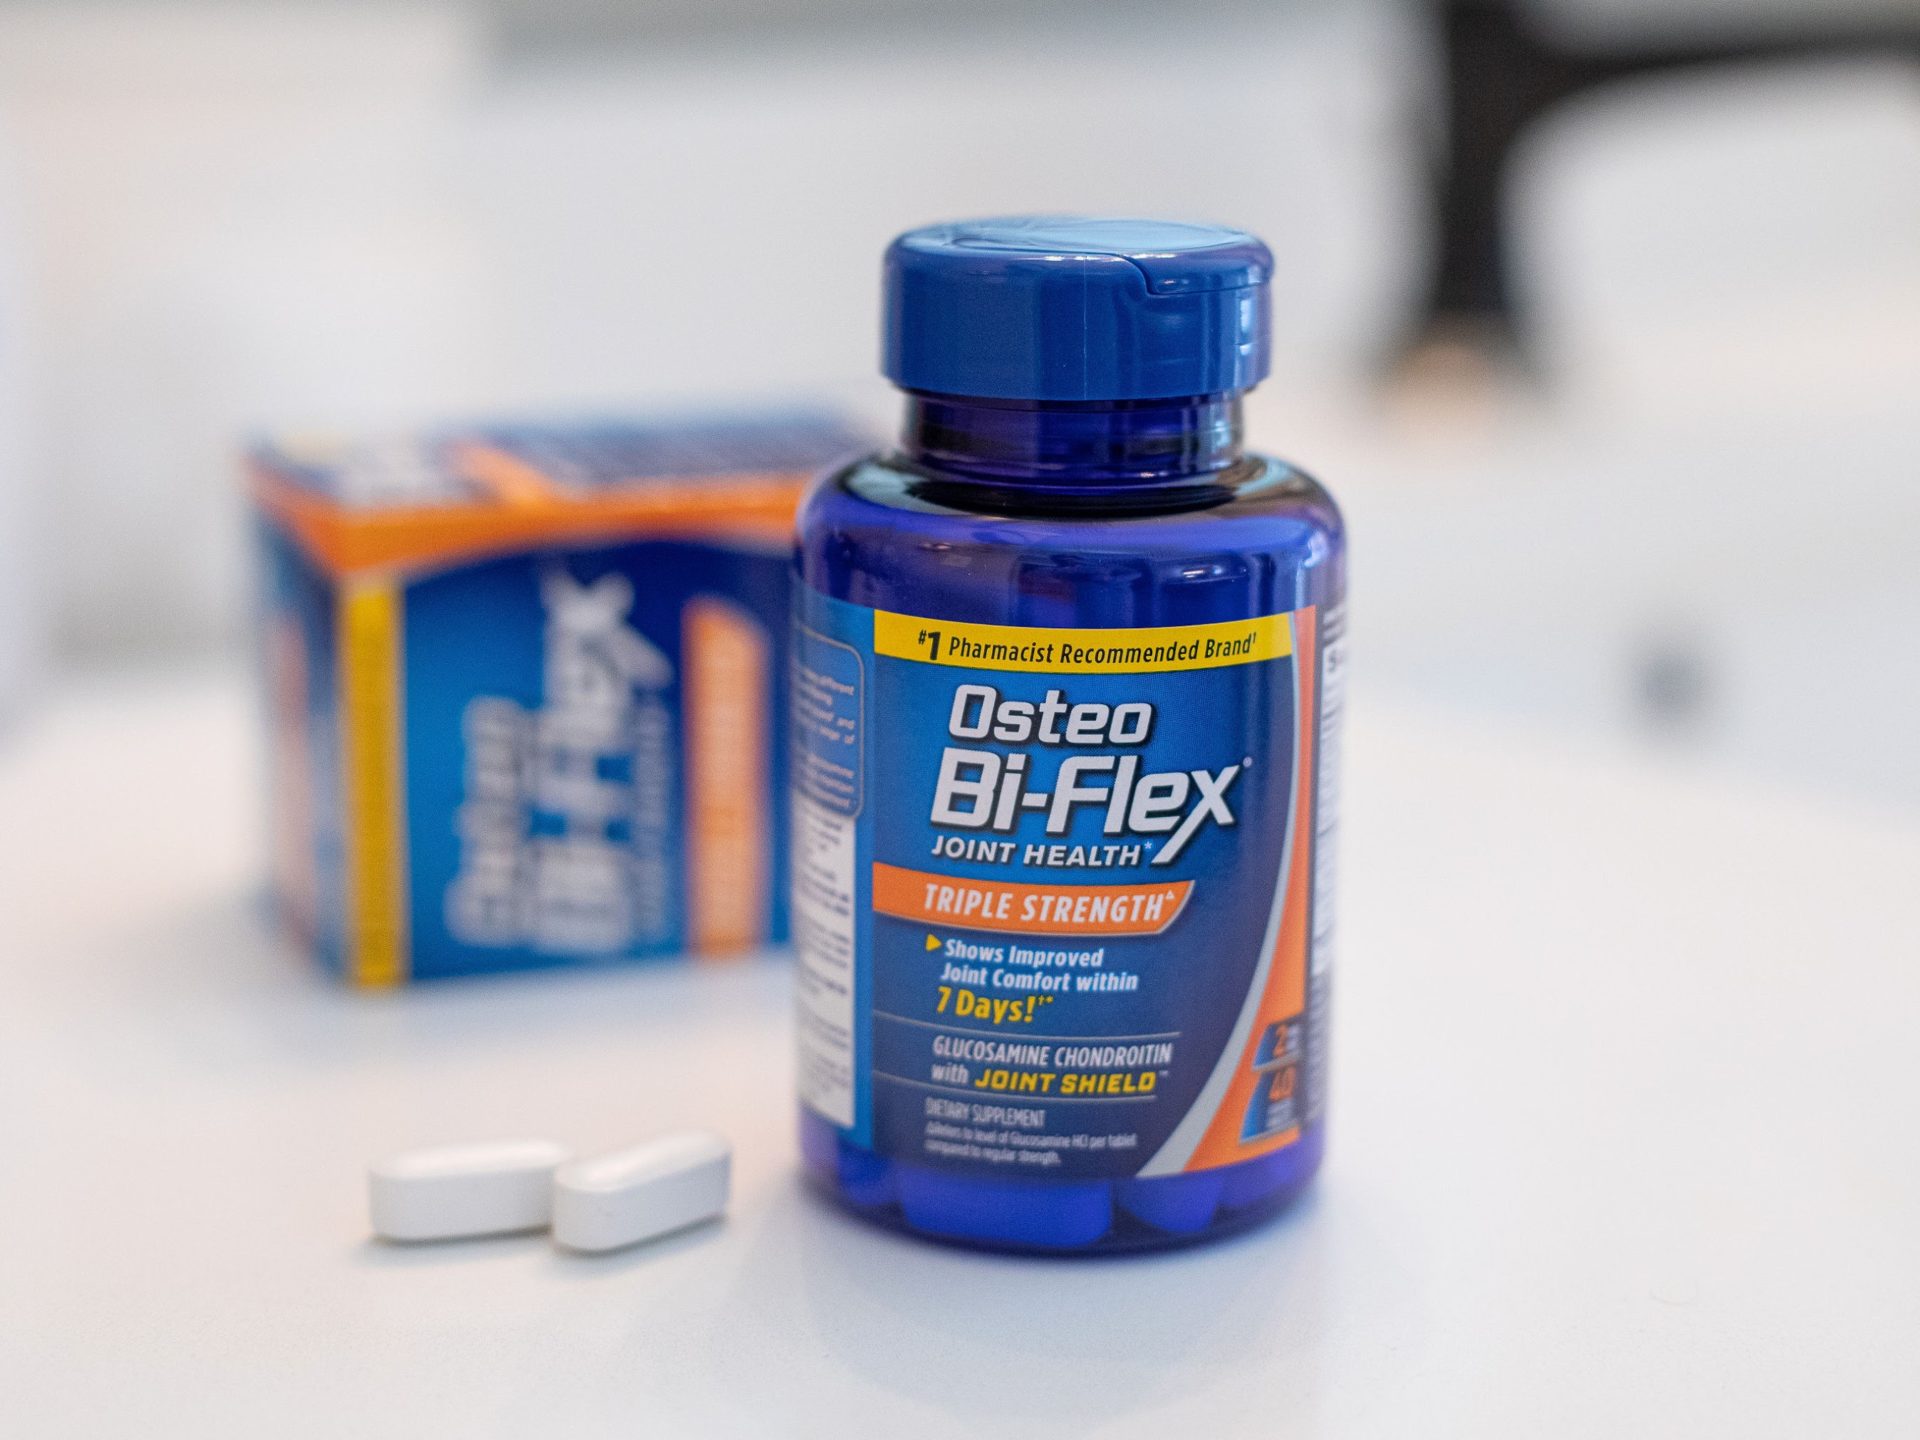 Osteo Bi-Flex Coupon & Sale Makes Products As Low As $5.50 At Kroger (Regular Price $20.99)